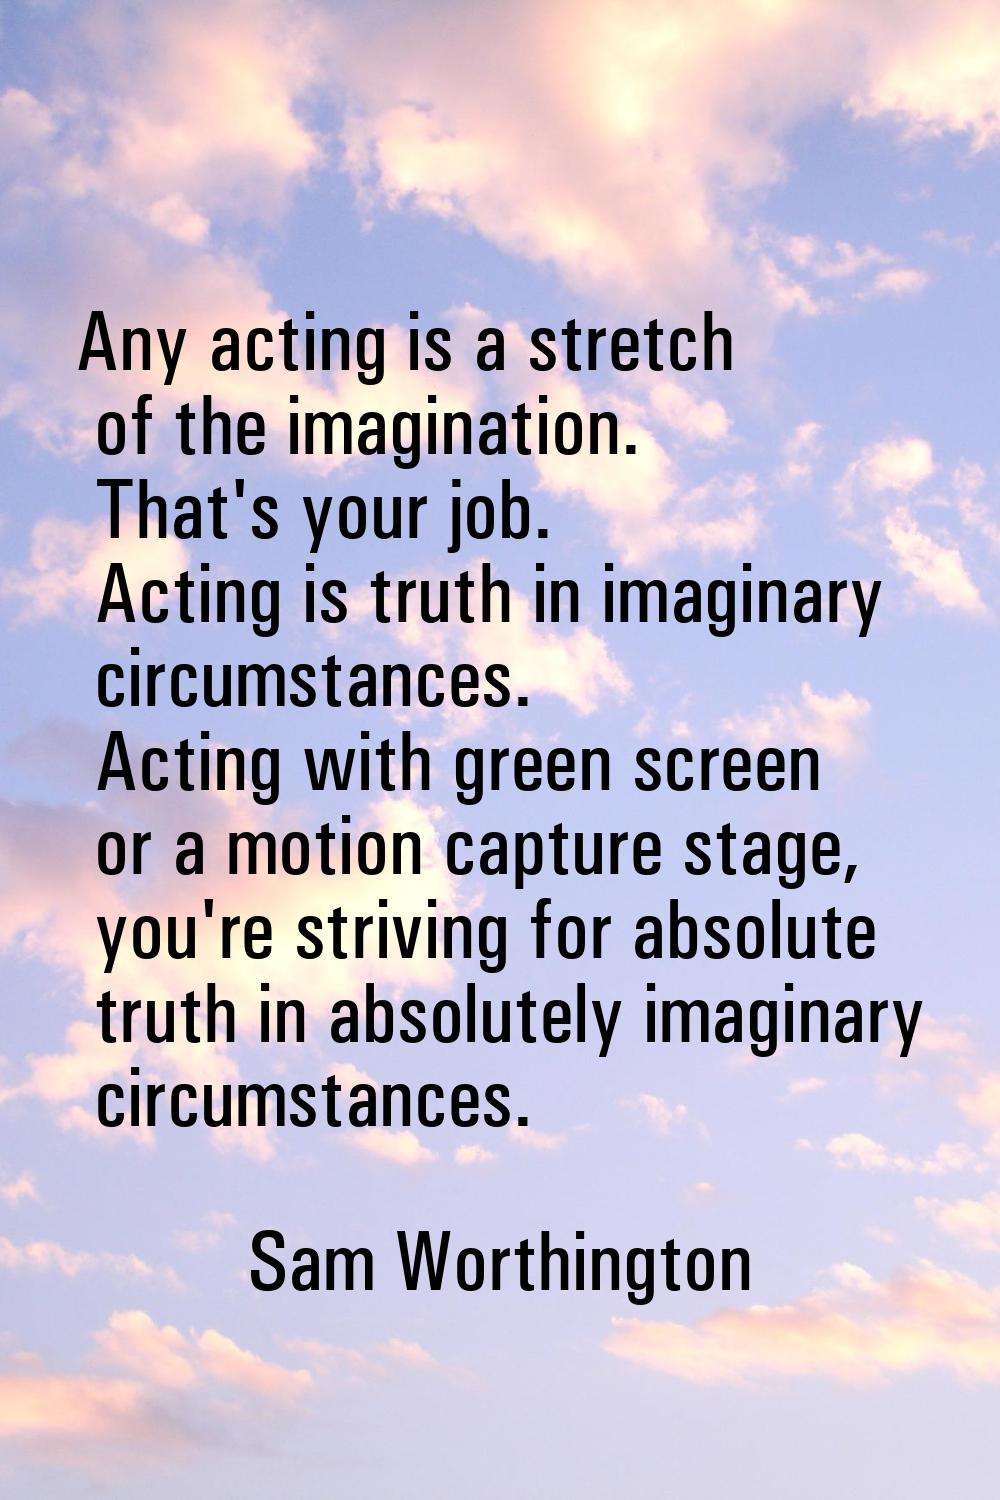 Any acting is a stretch of the imagination. That's your job. Acting is truth in imaginary circumsta